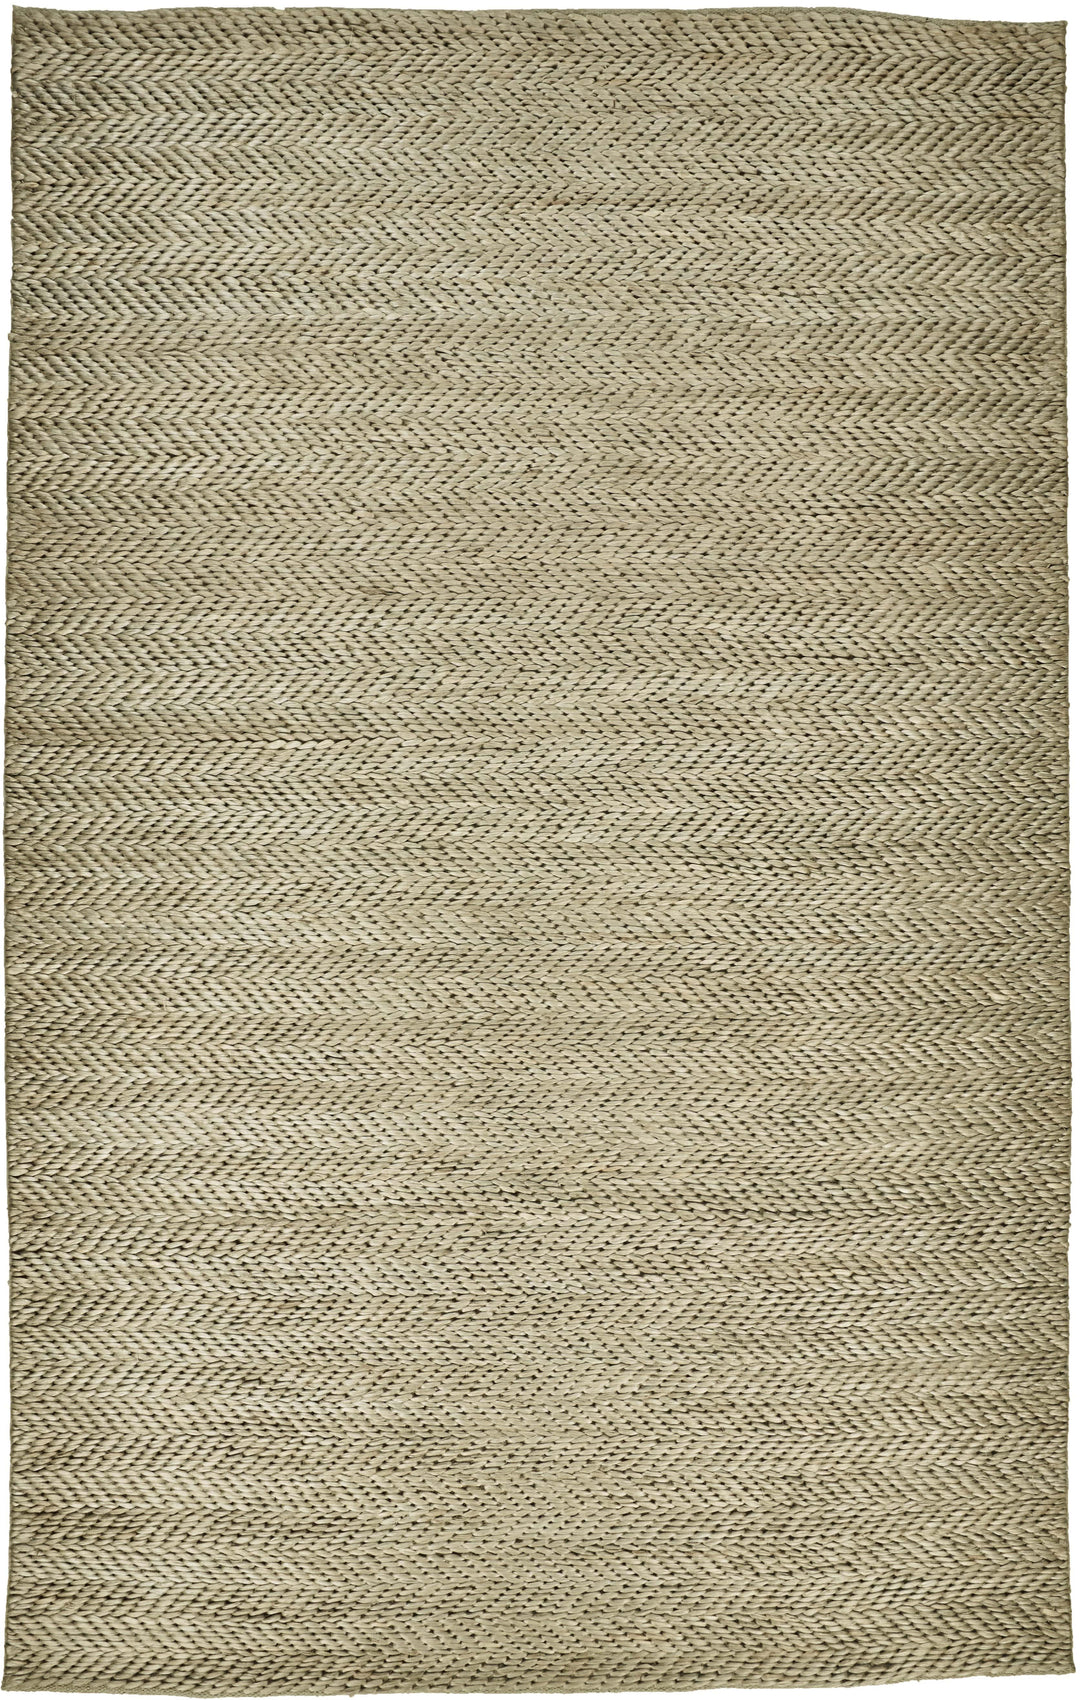 Feizy Feizy Kaelani Natural Handmade Rug - Available in 5 Sizes - Dove Gray 4' x 6' 6850770FDOV000C00